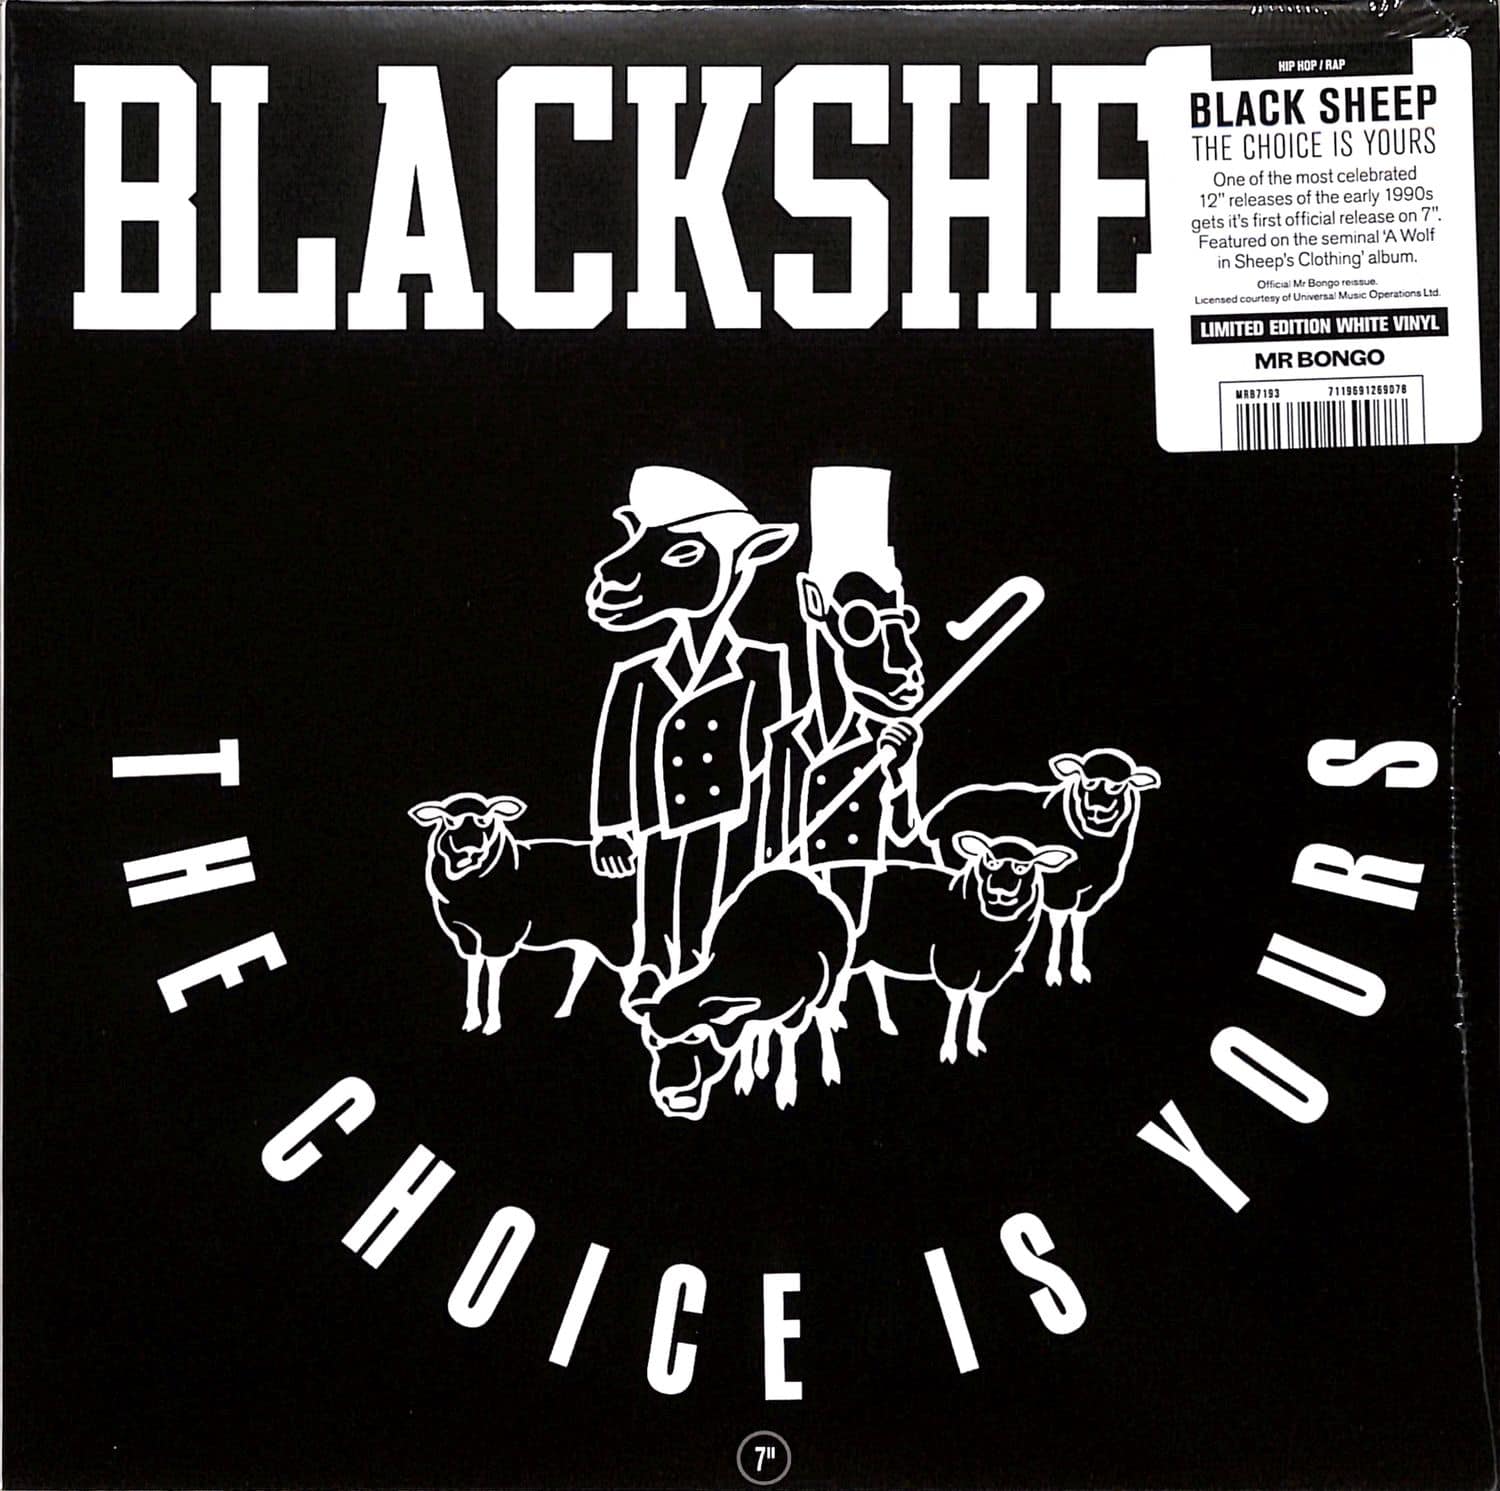 Black Sheep - THE CHOICE IS YOURS 